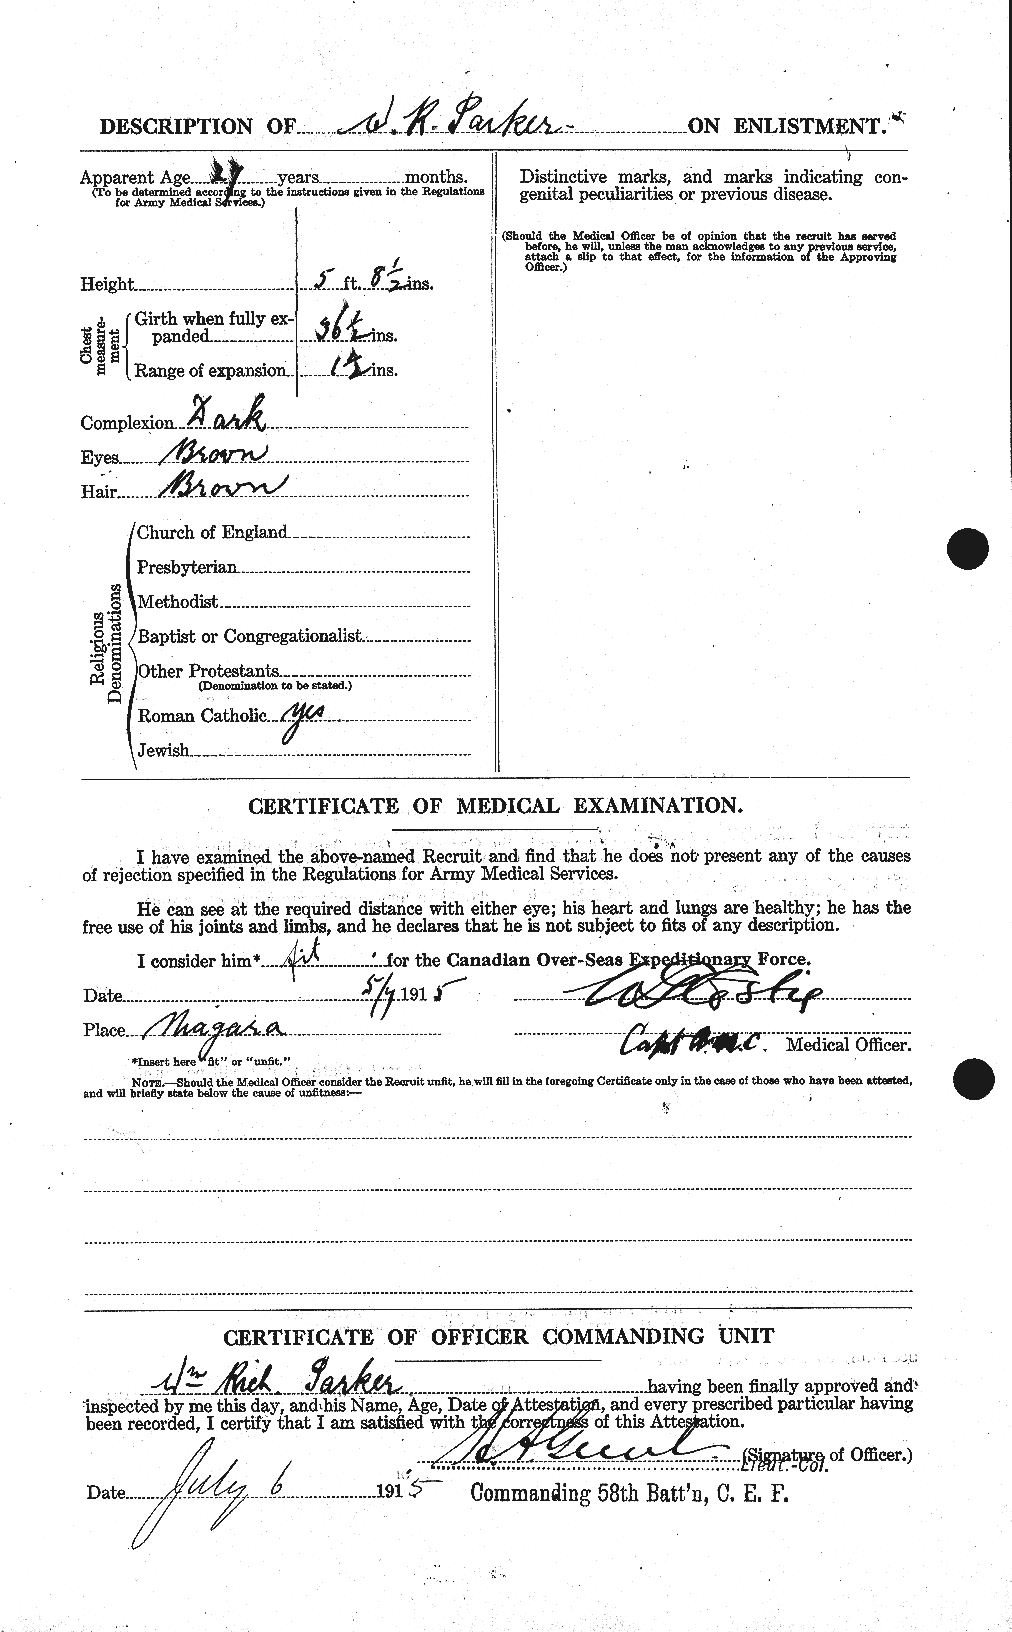 Personnel Records of the First World War - CEF 565782b